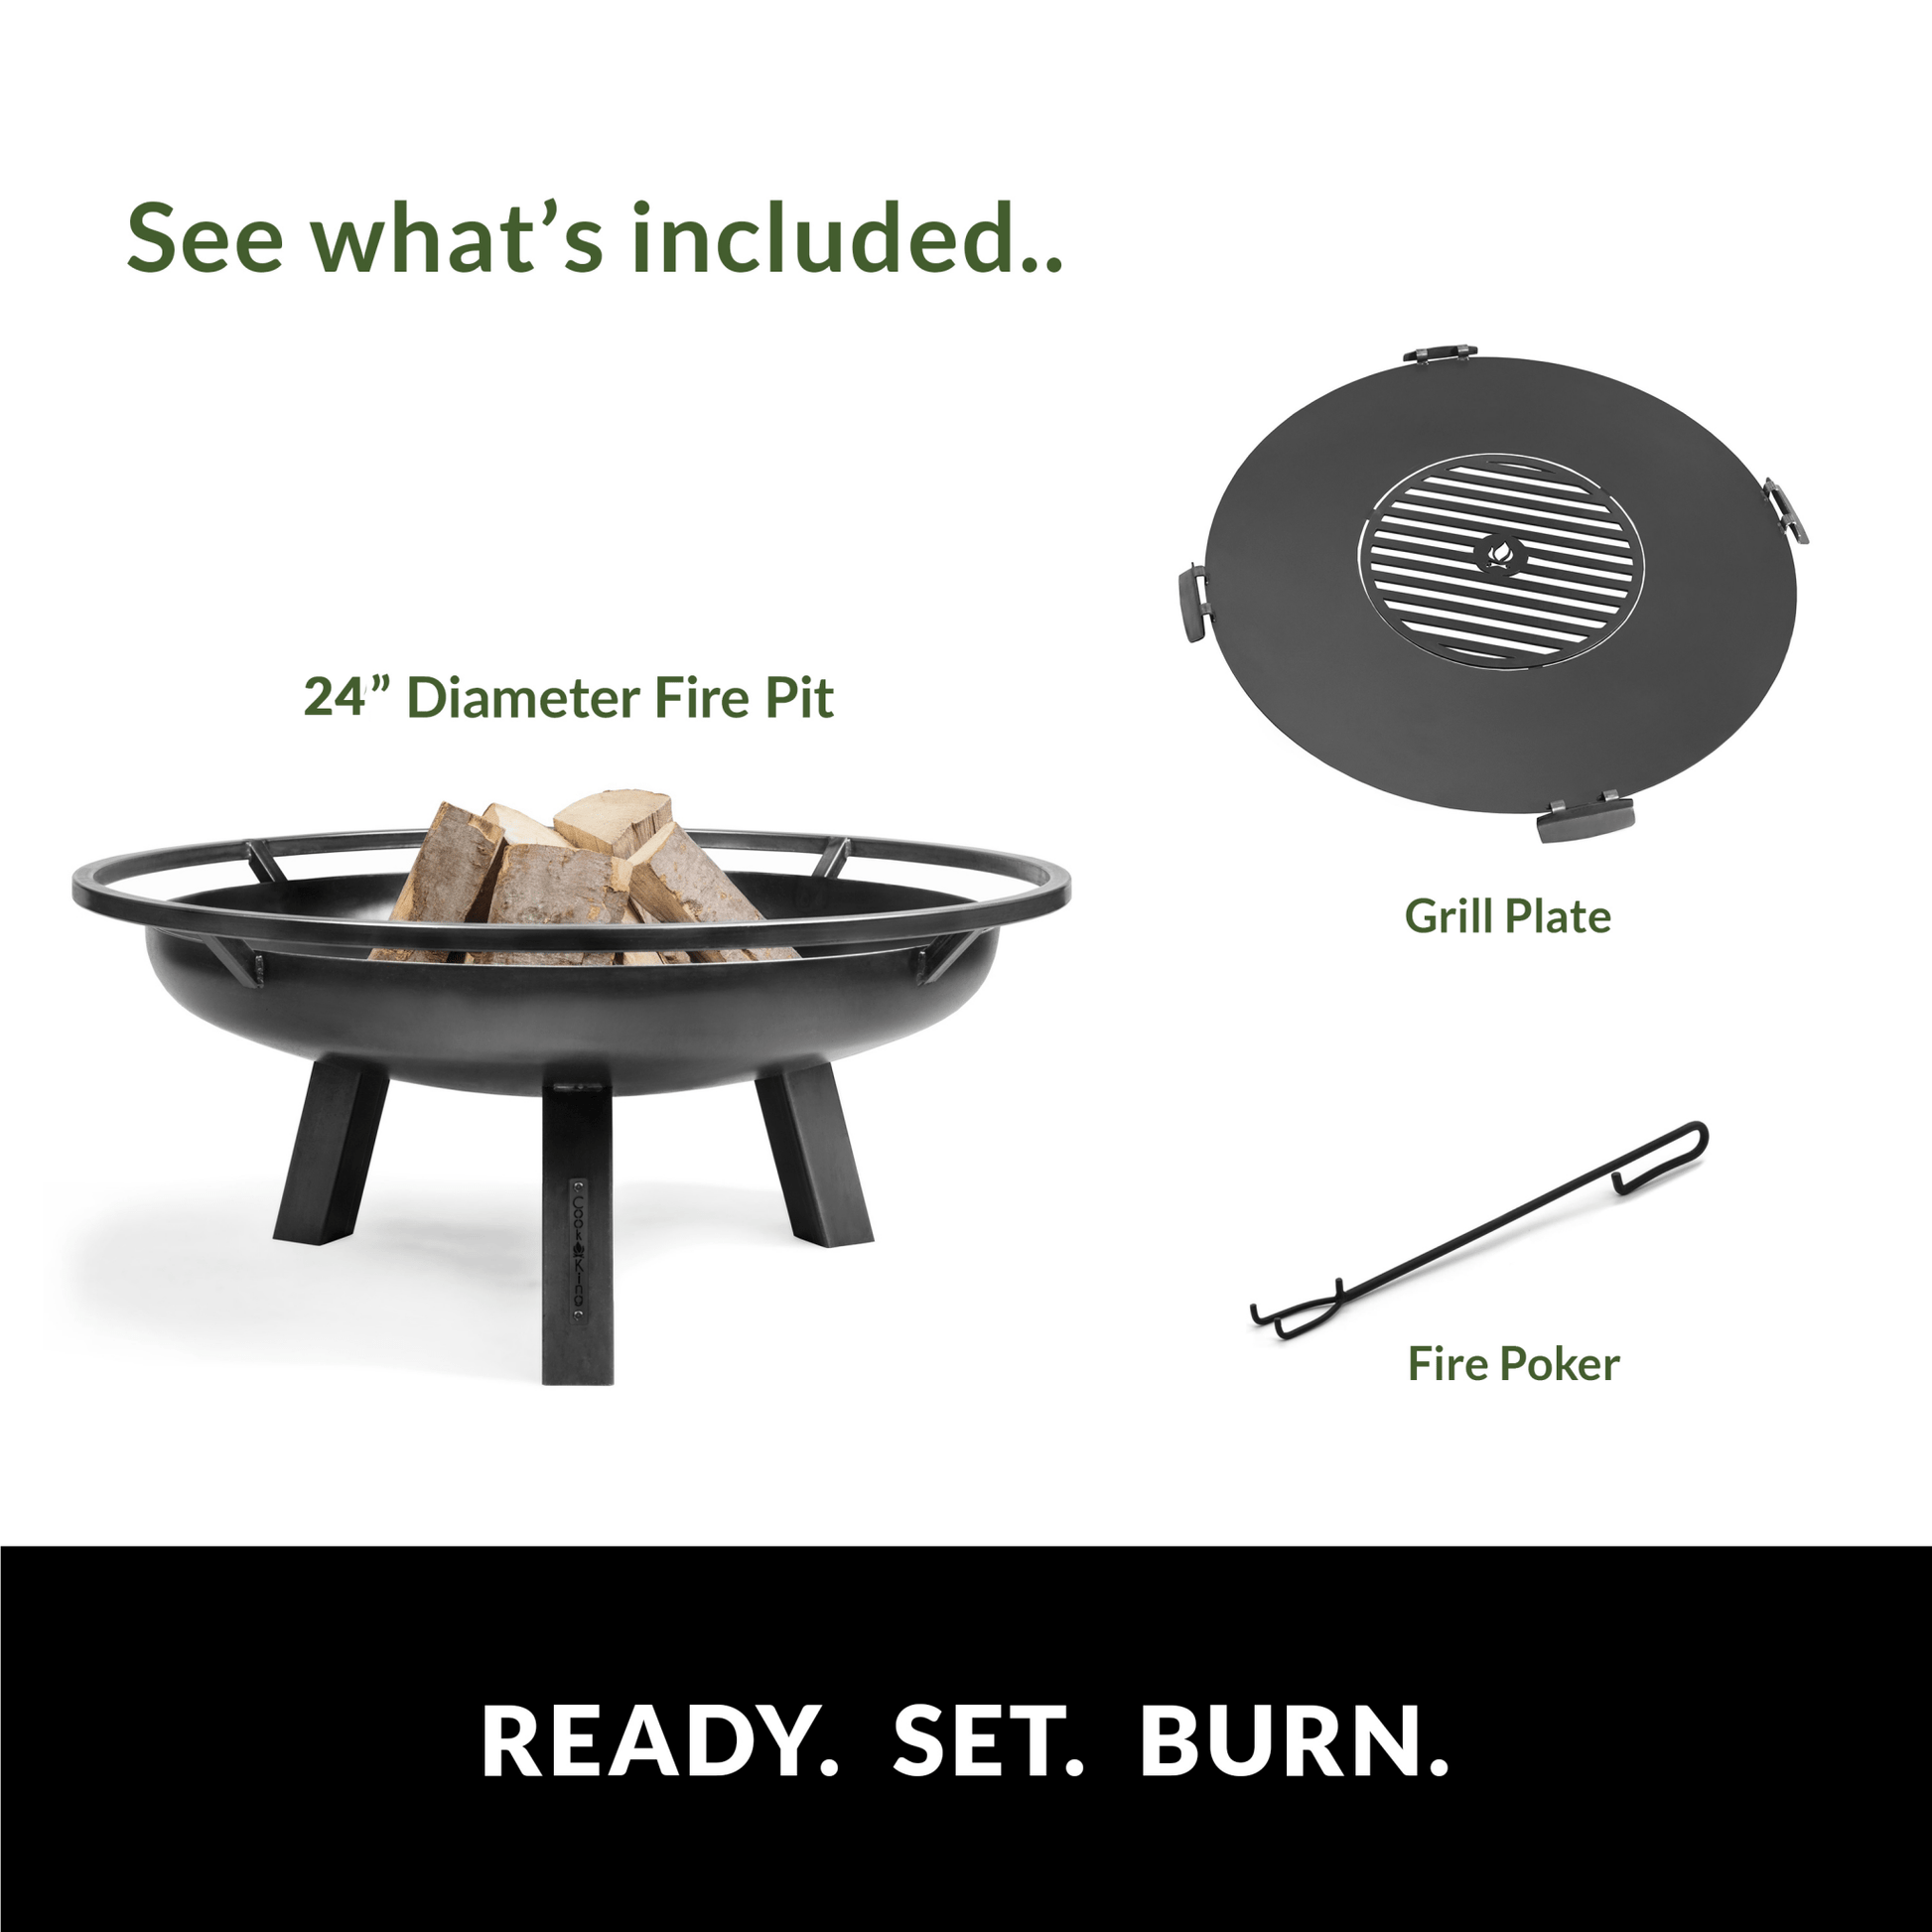 Porto 24" Fire Pit with Grill Plate - Good Directions